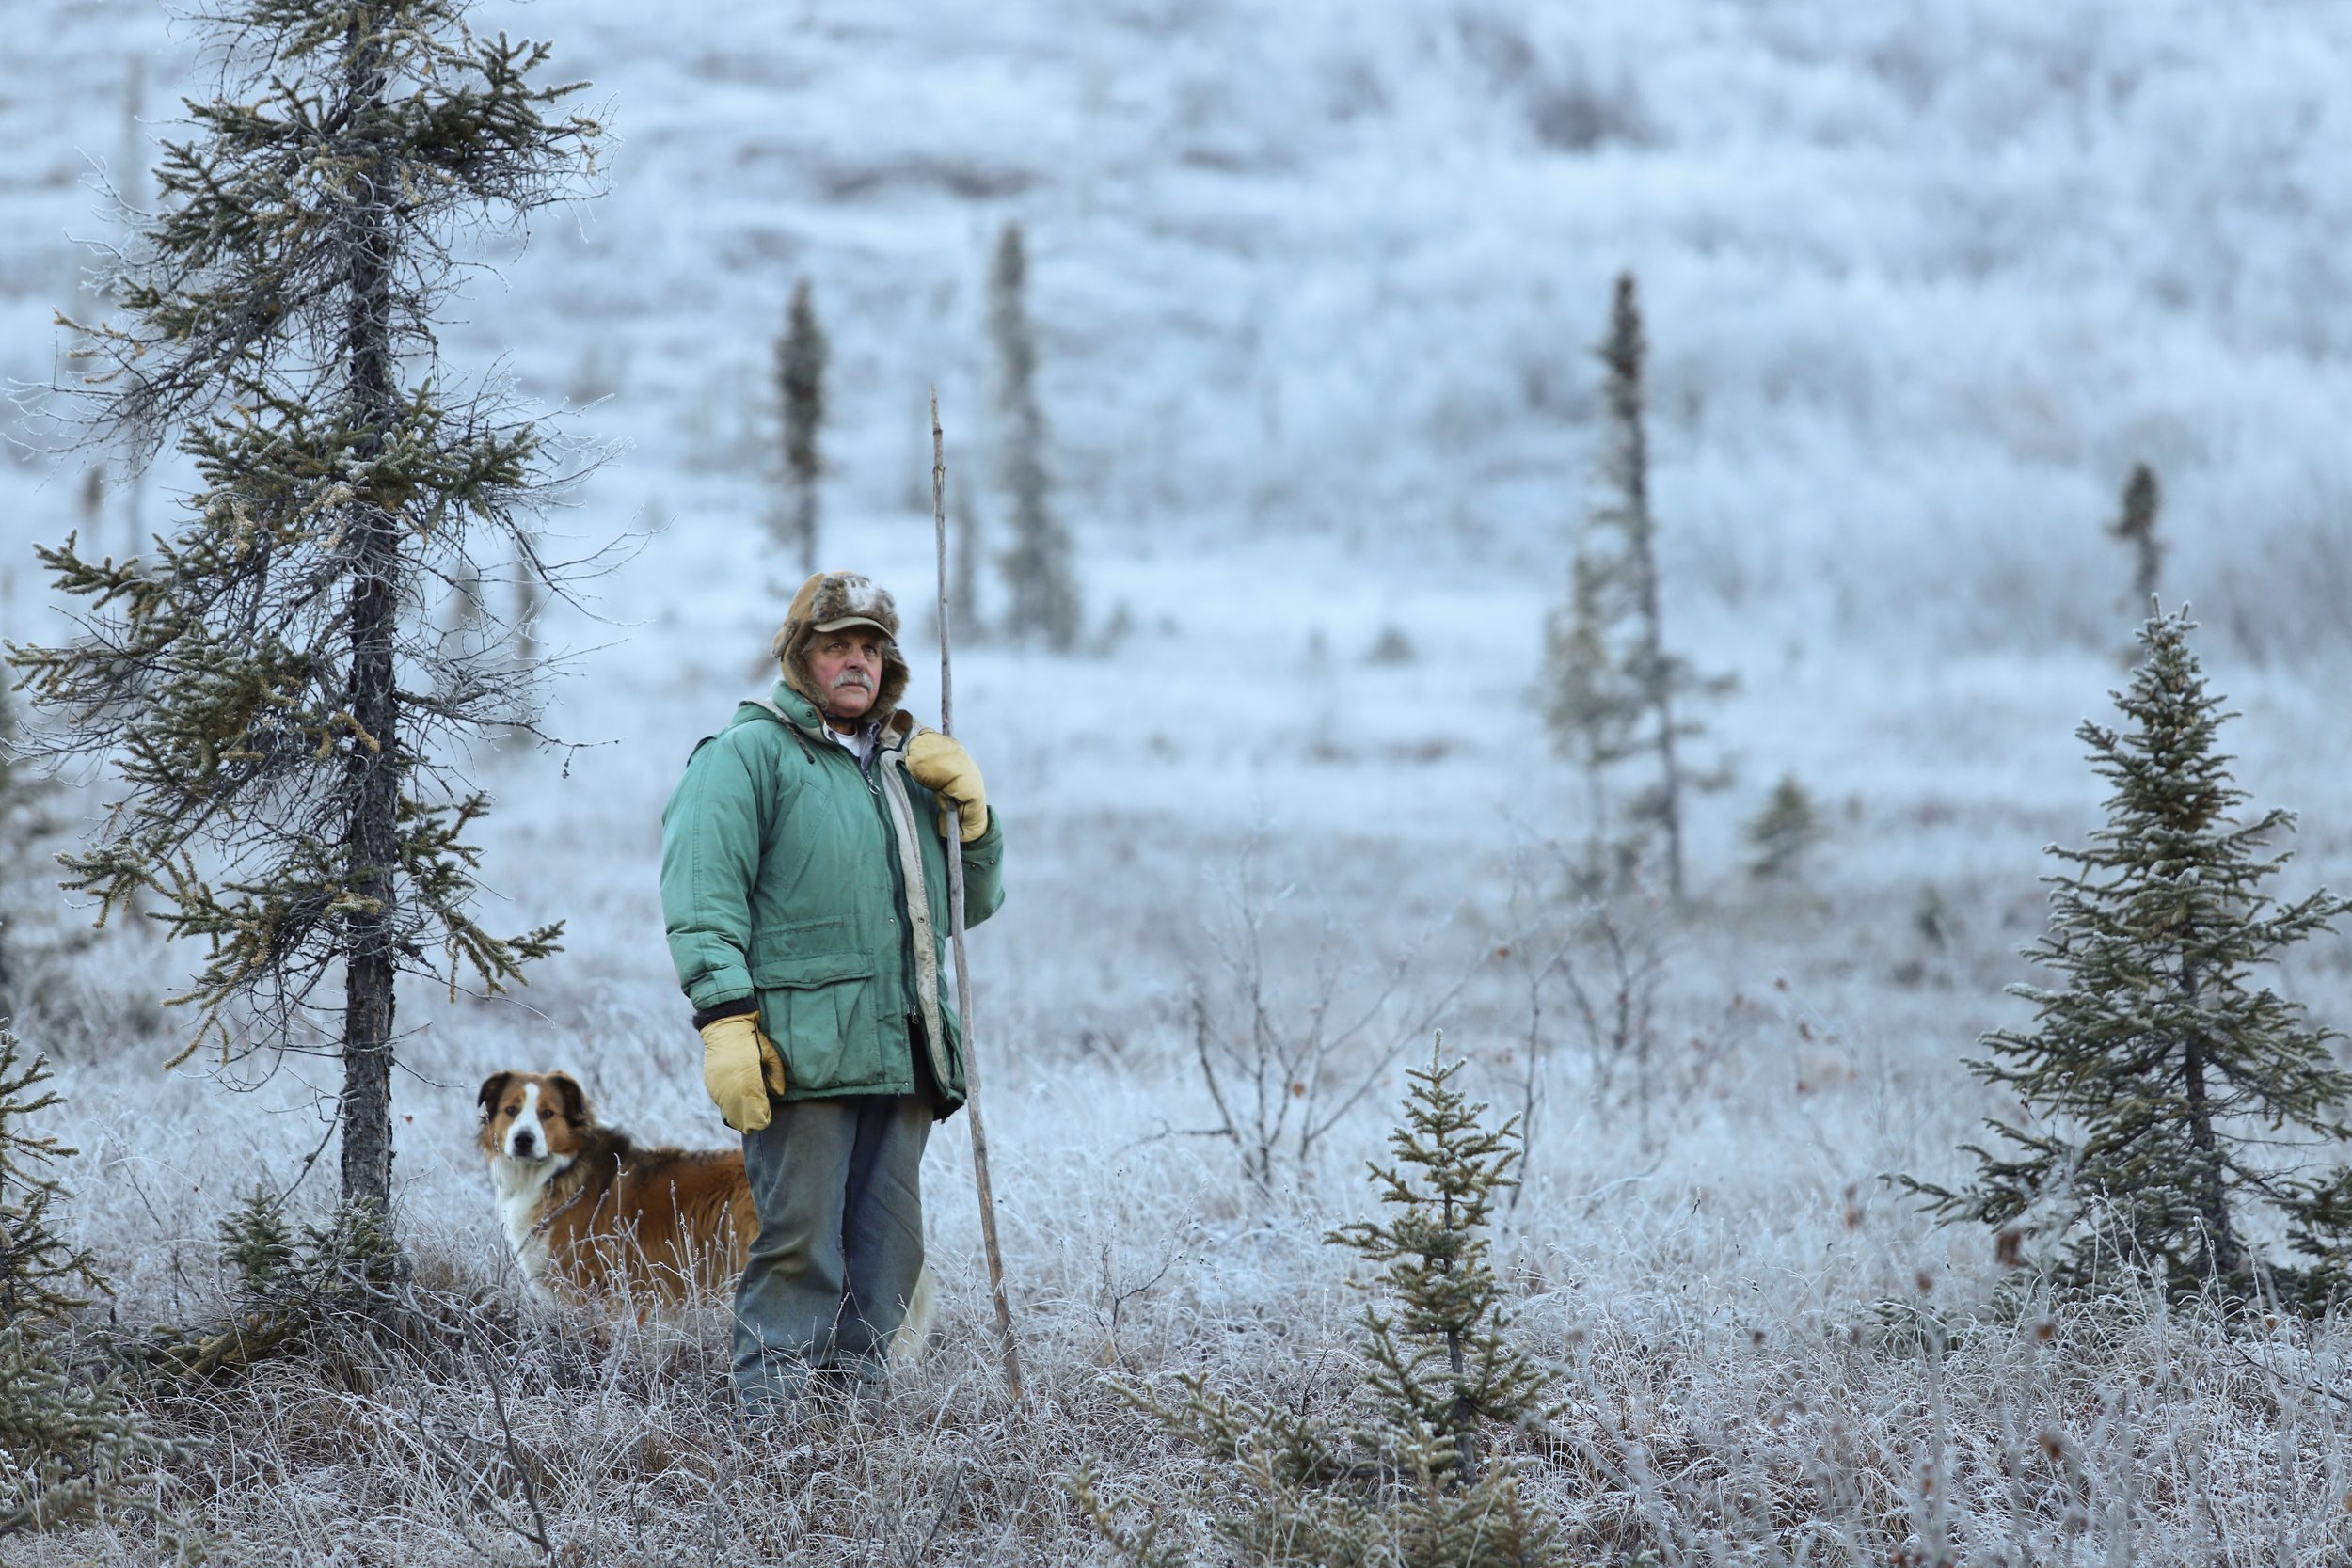  In the 1980s, Steve left his job as a teacher in the Lower 48 and drove up to Alaska with his family to pursue a dream to live on the land. Over the next ten years, Steve and his wife Kathy ran sled dogs, maintained a trap line, and raised their dau